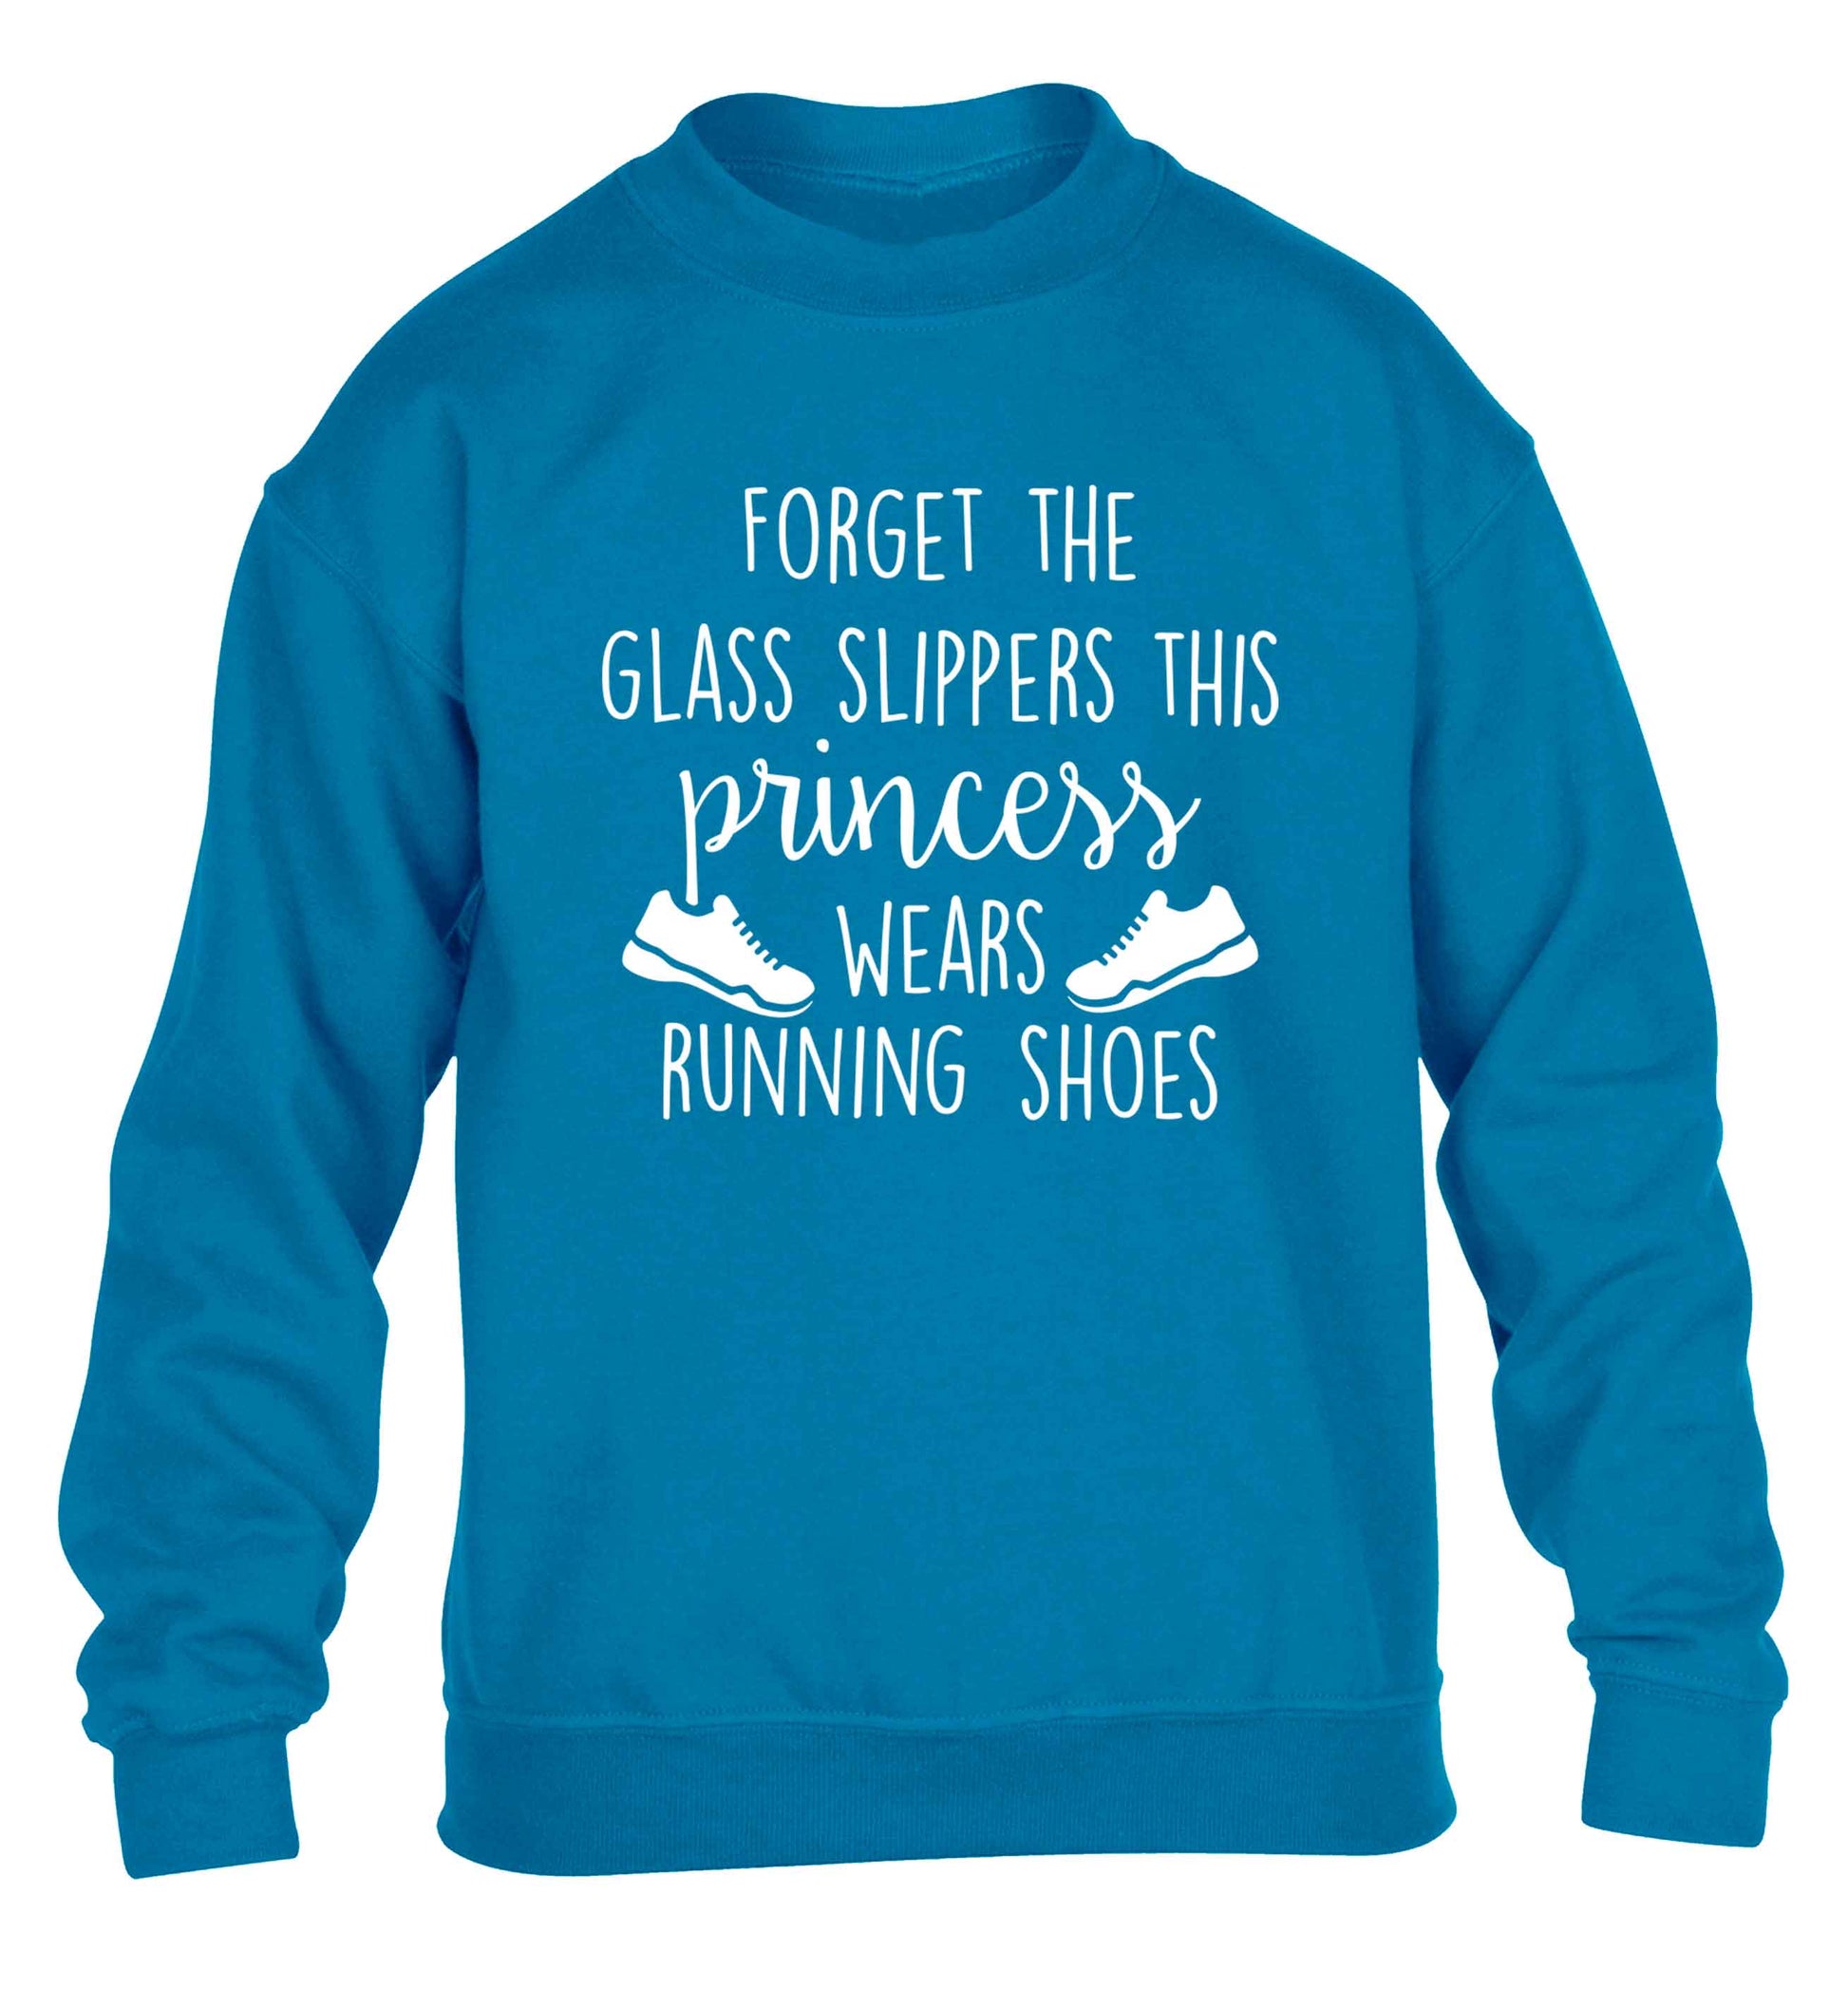 Forget the glass slippers this princess wears running shoes children's blue sweater 12-13 Years